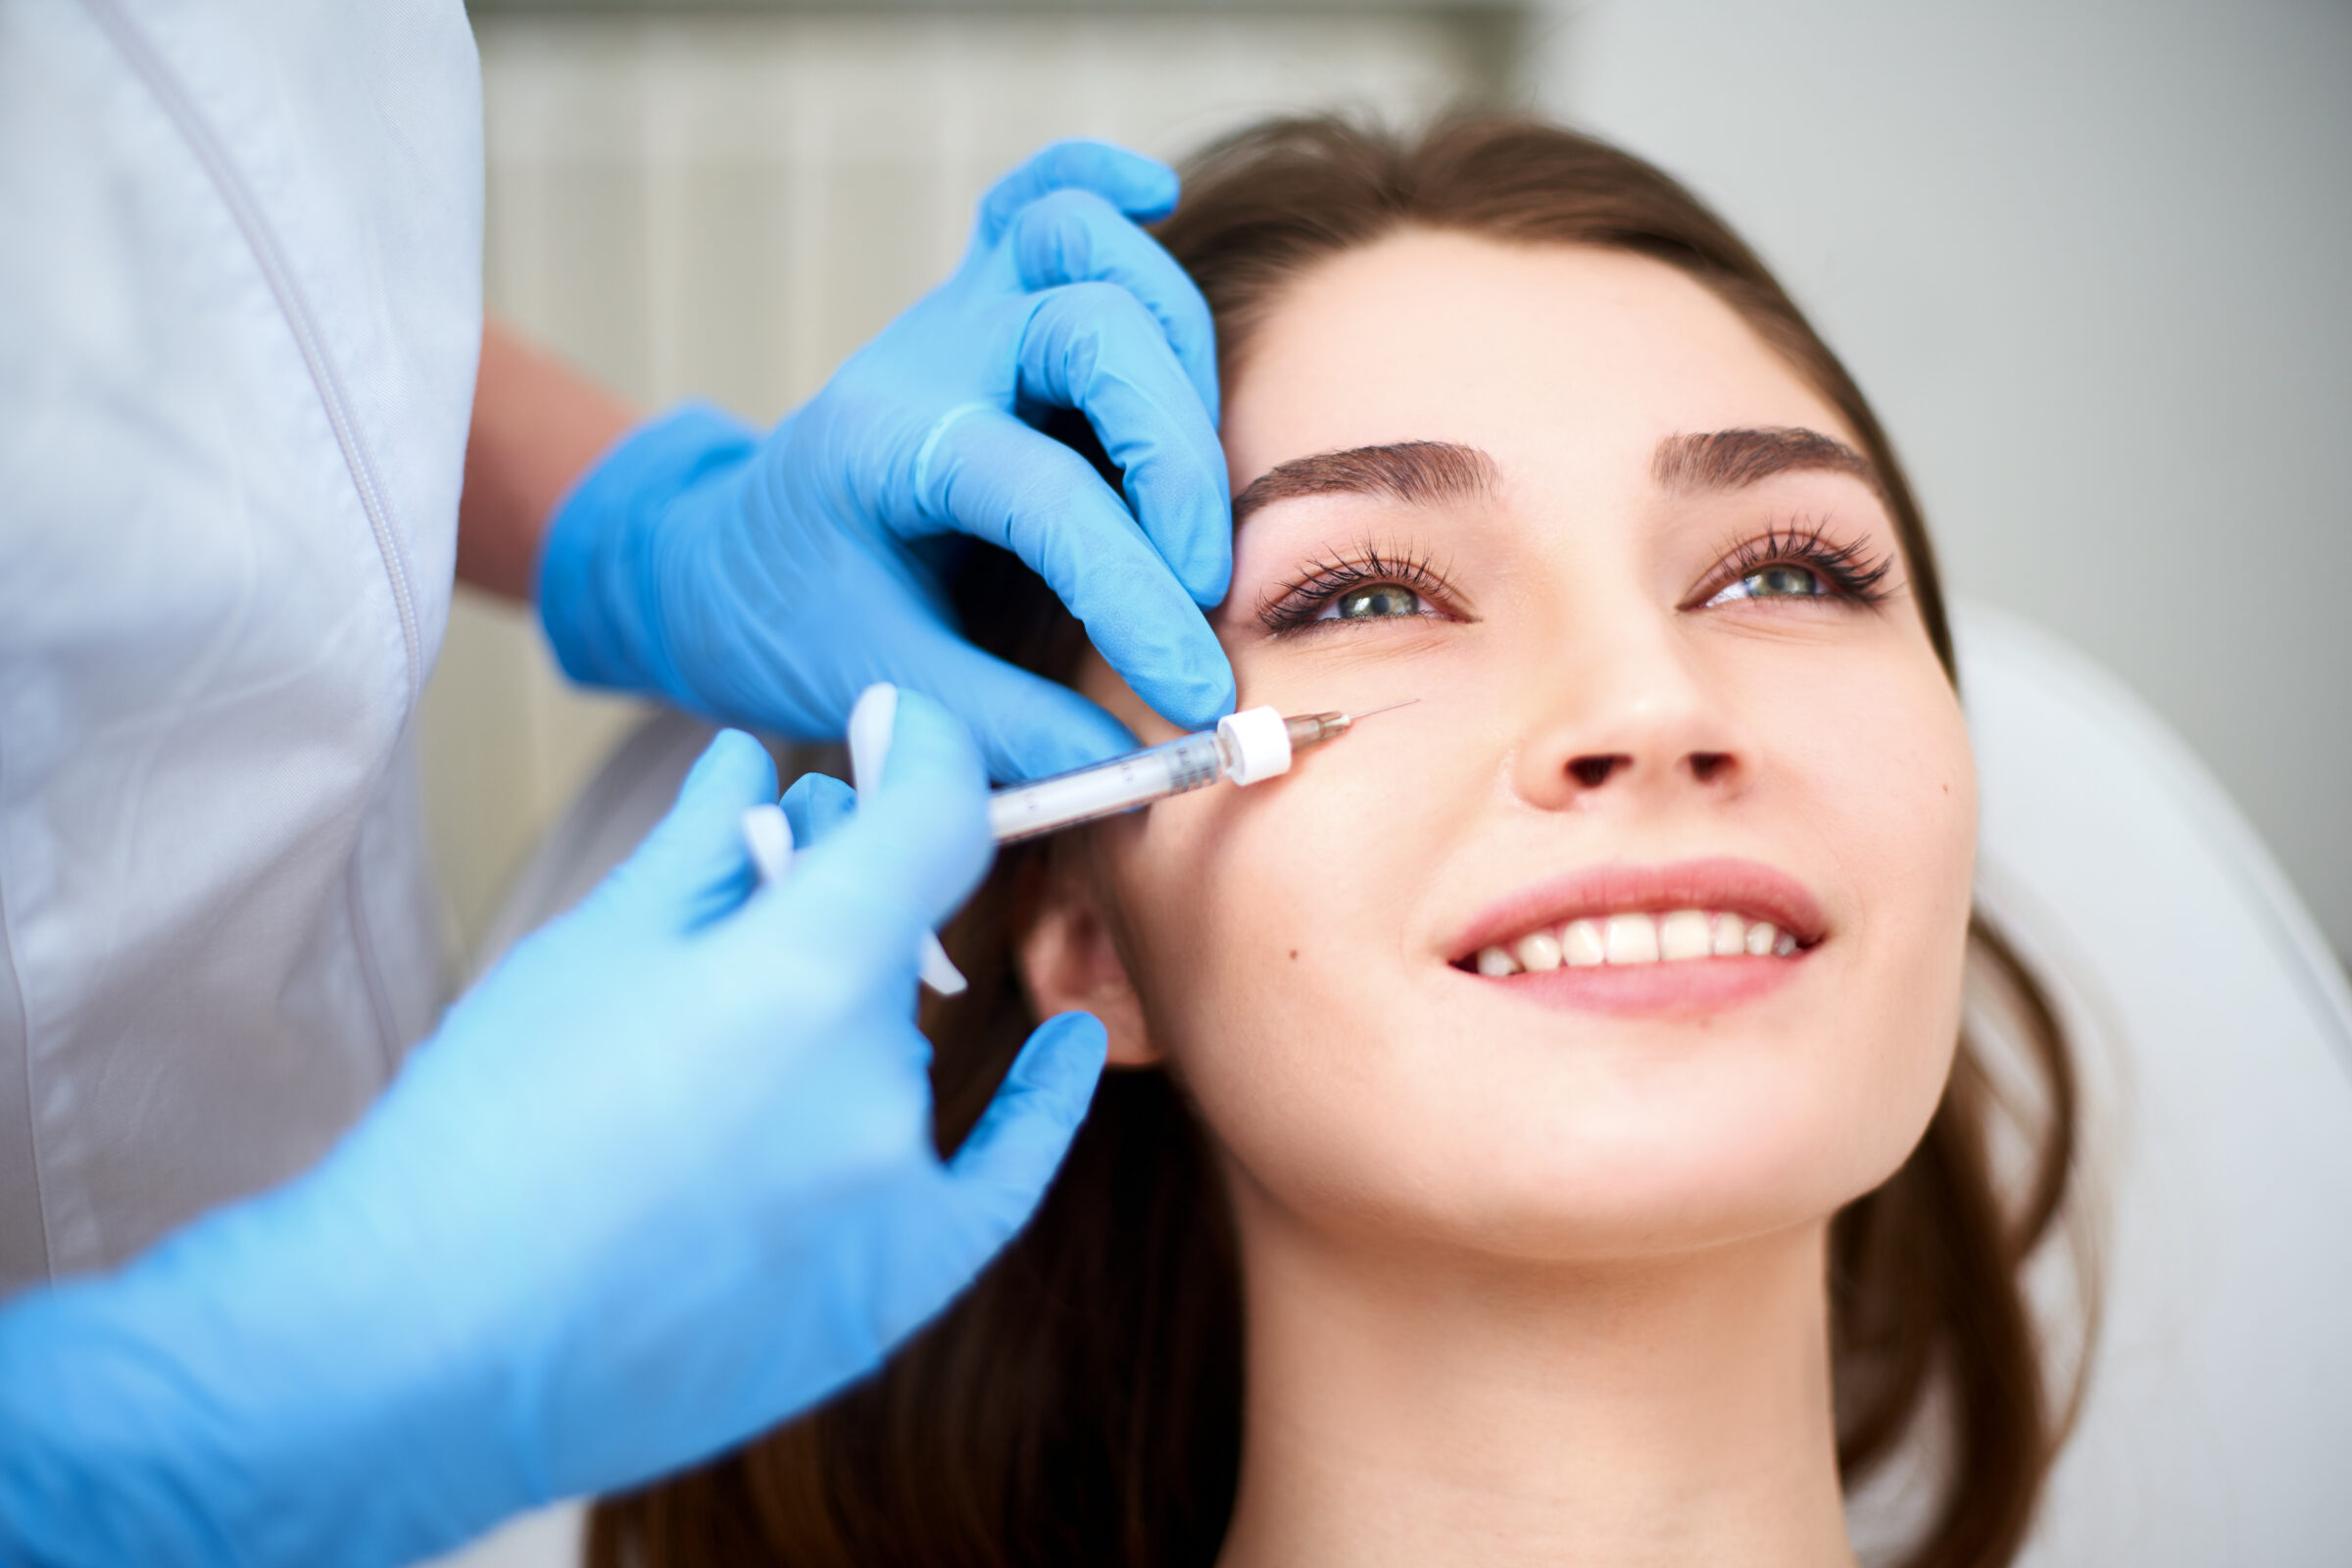 A woman getting an undereye filler injection